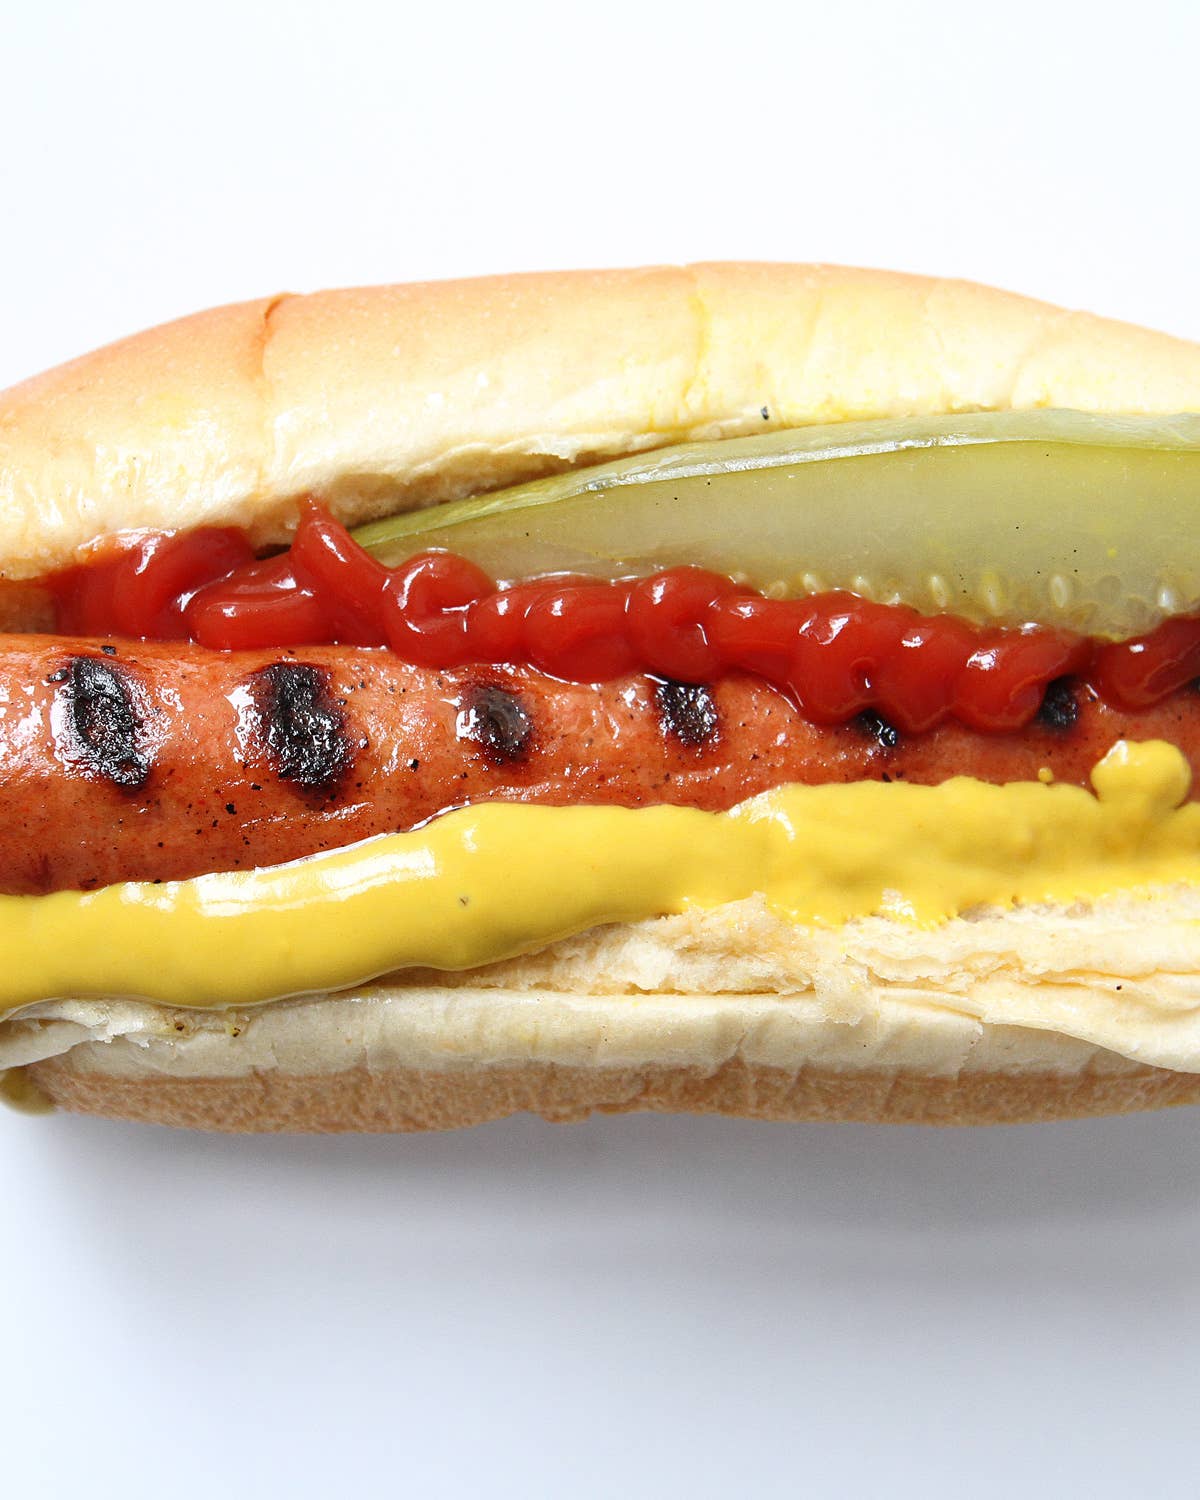 How to Build Your Best Hot Dog